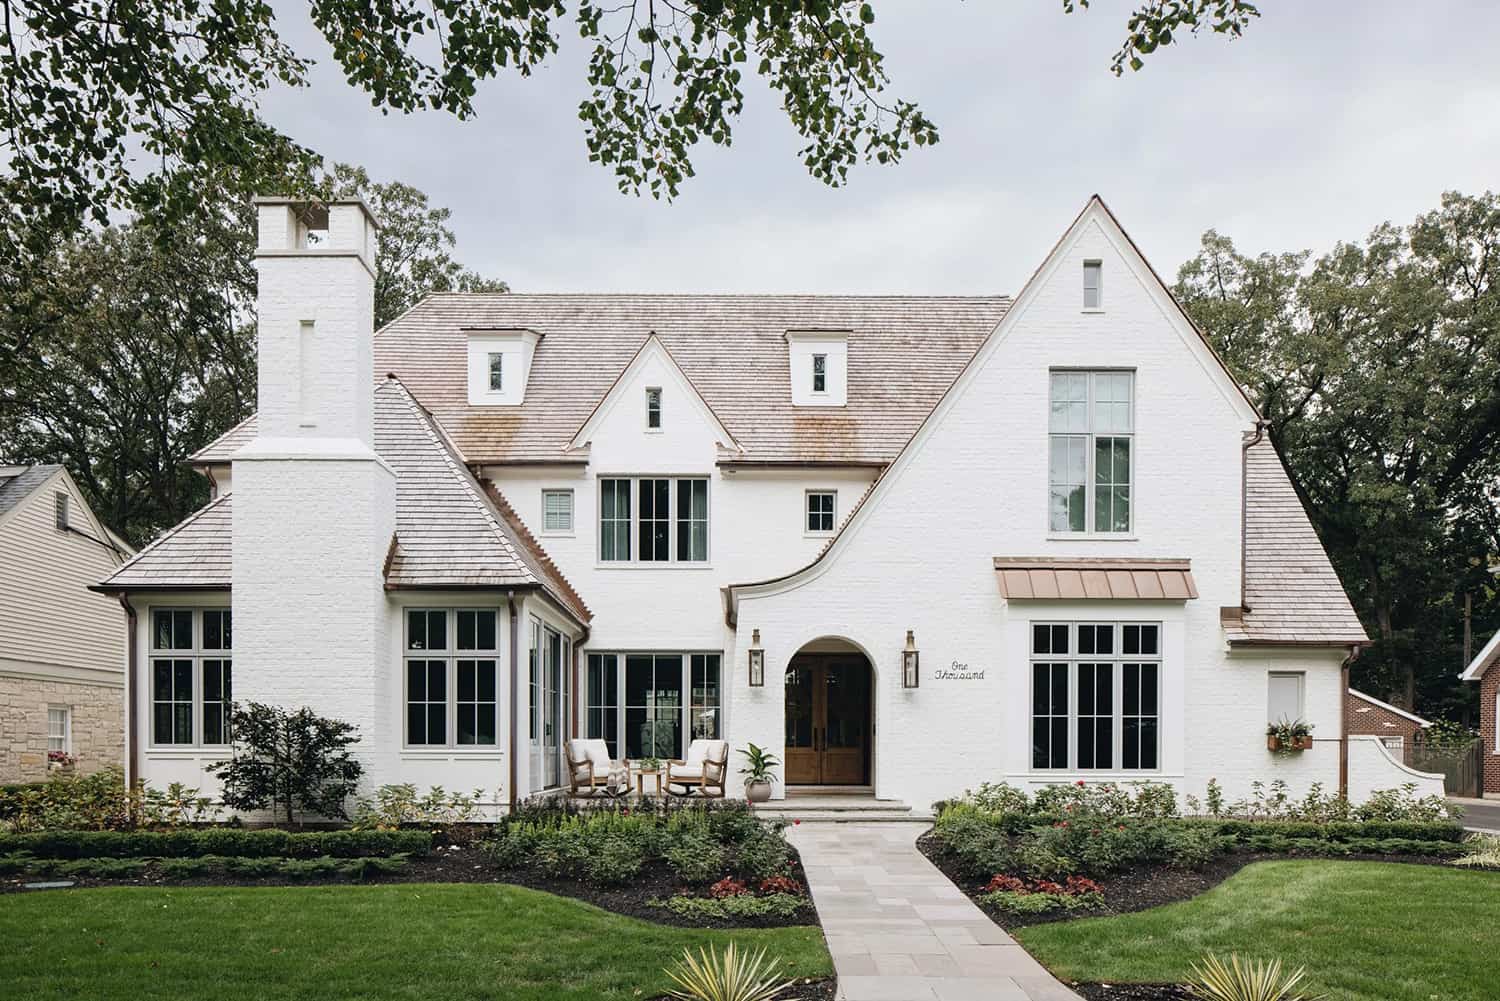 Tour this absolutely stunning and timeless white brick house in